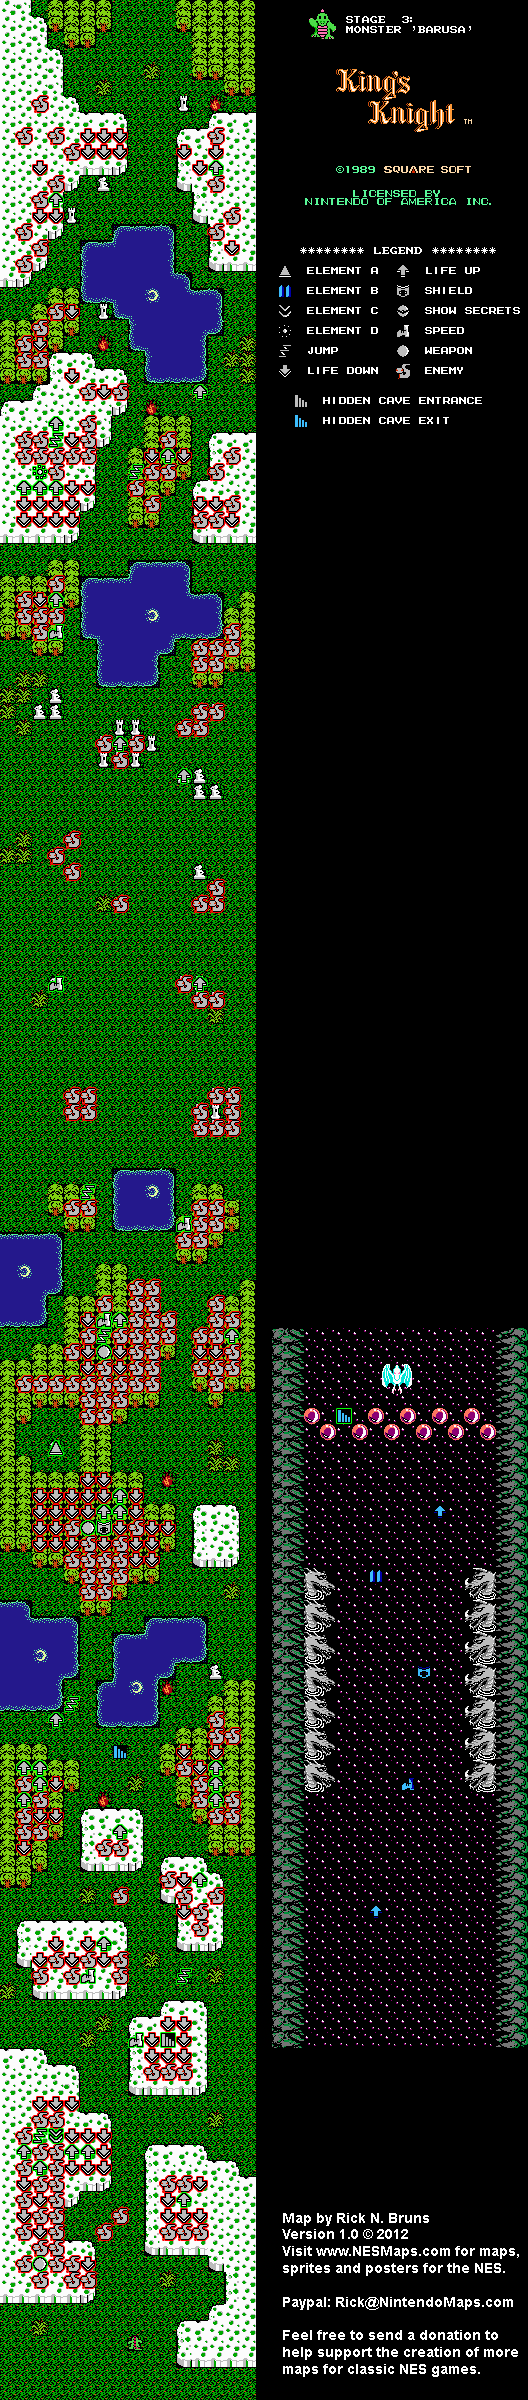 King's Knight - Stage 3 - Nintendo NES Map